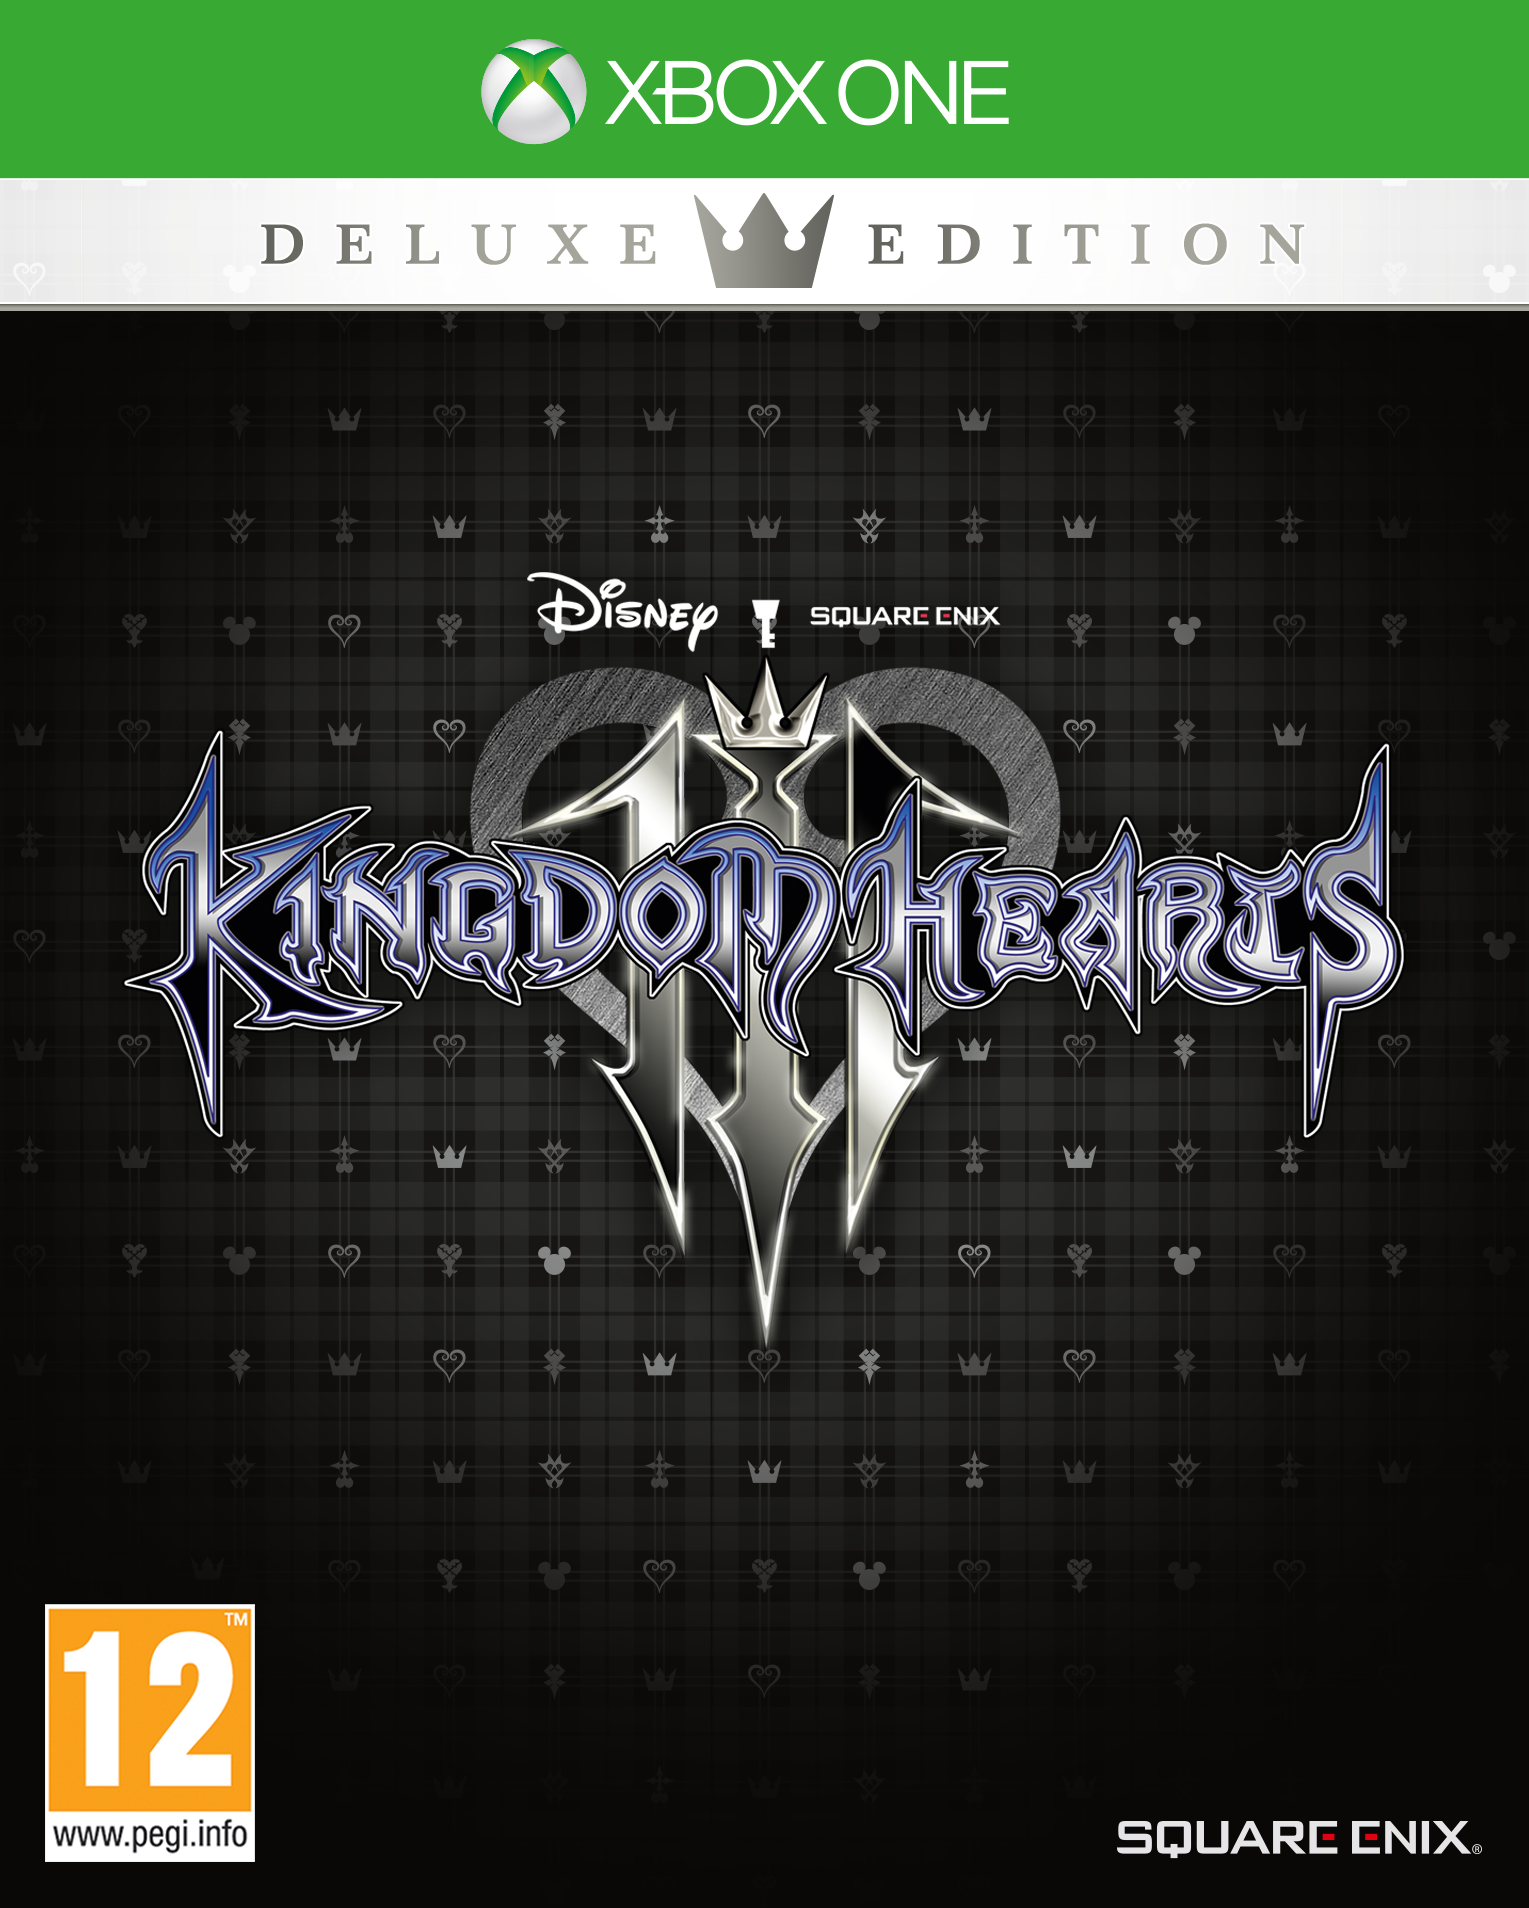 whats the difference between kingdom hearts 3 and the deluxe edition